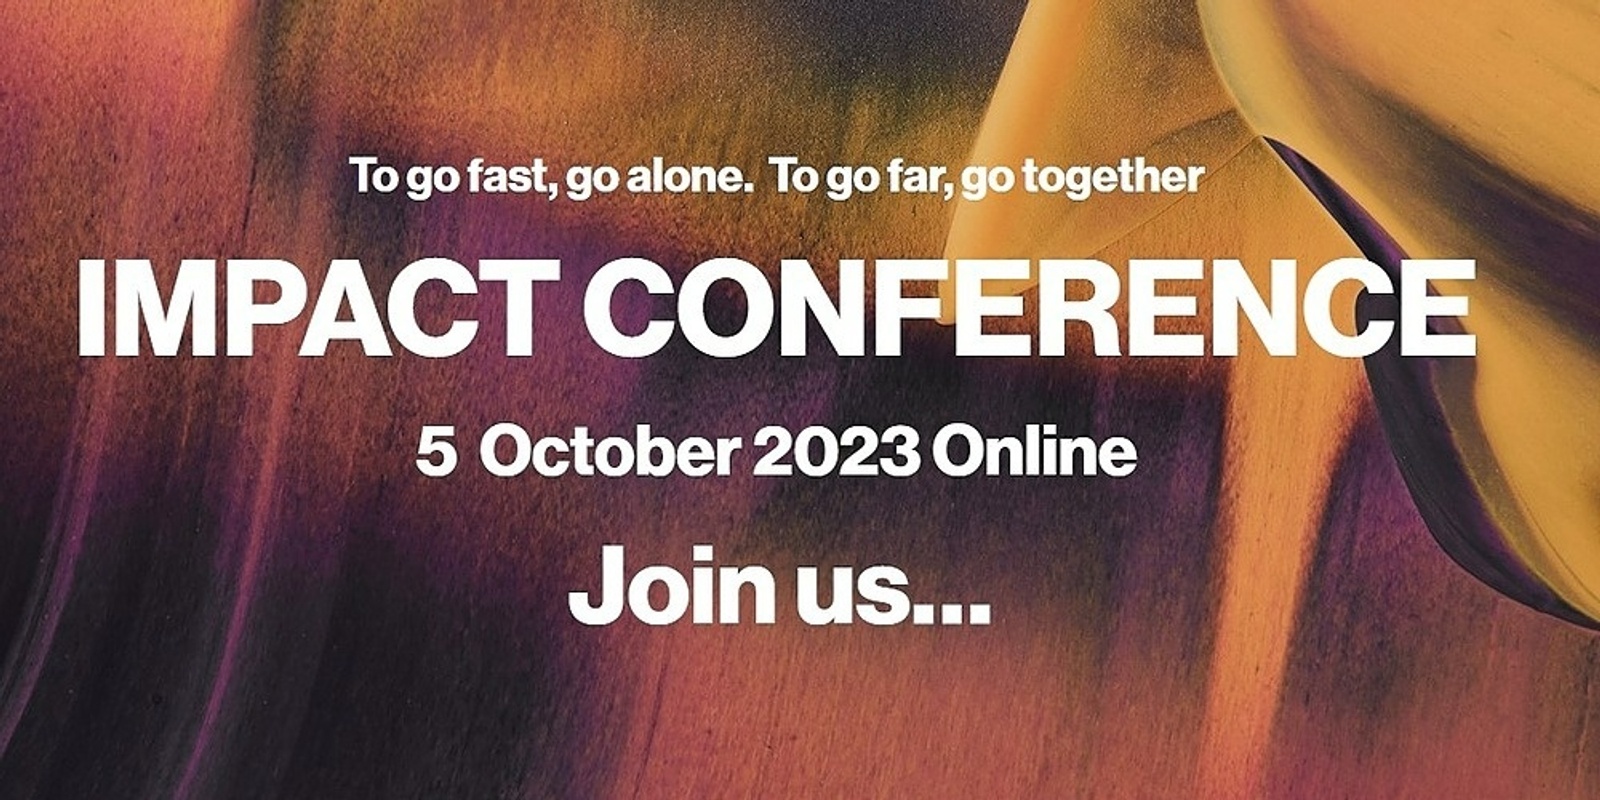 Seeds Impact Conference: 5 October 2023 (online)